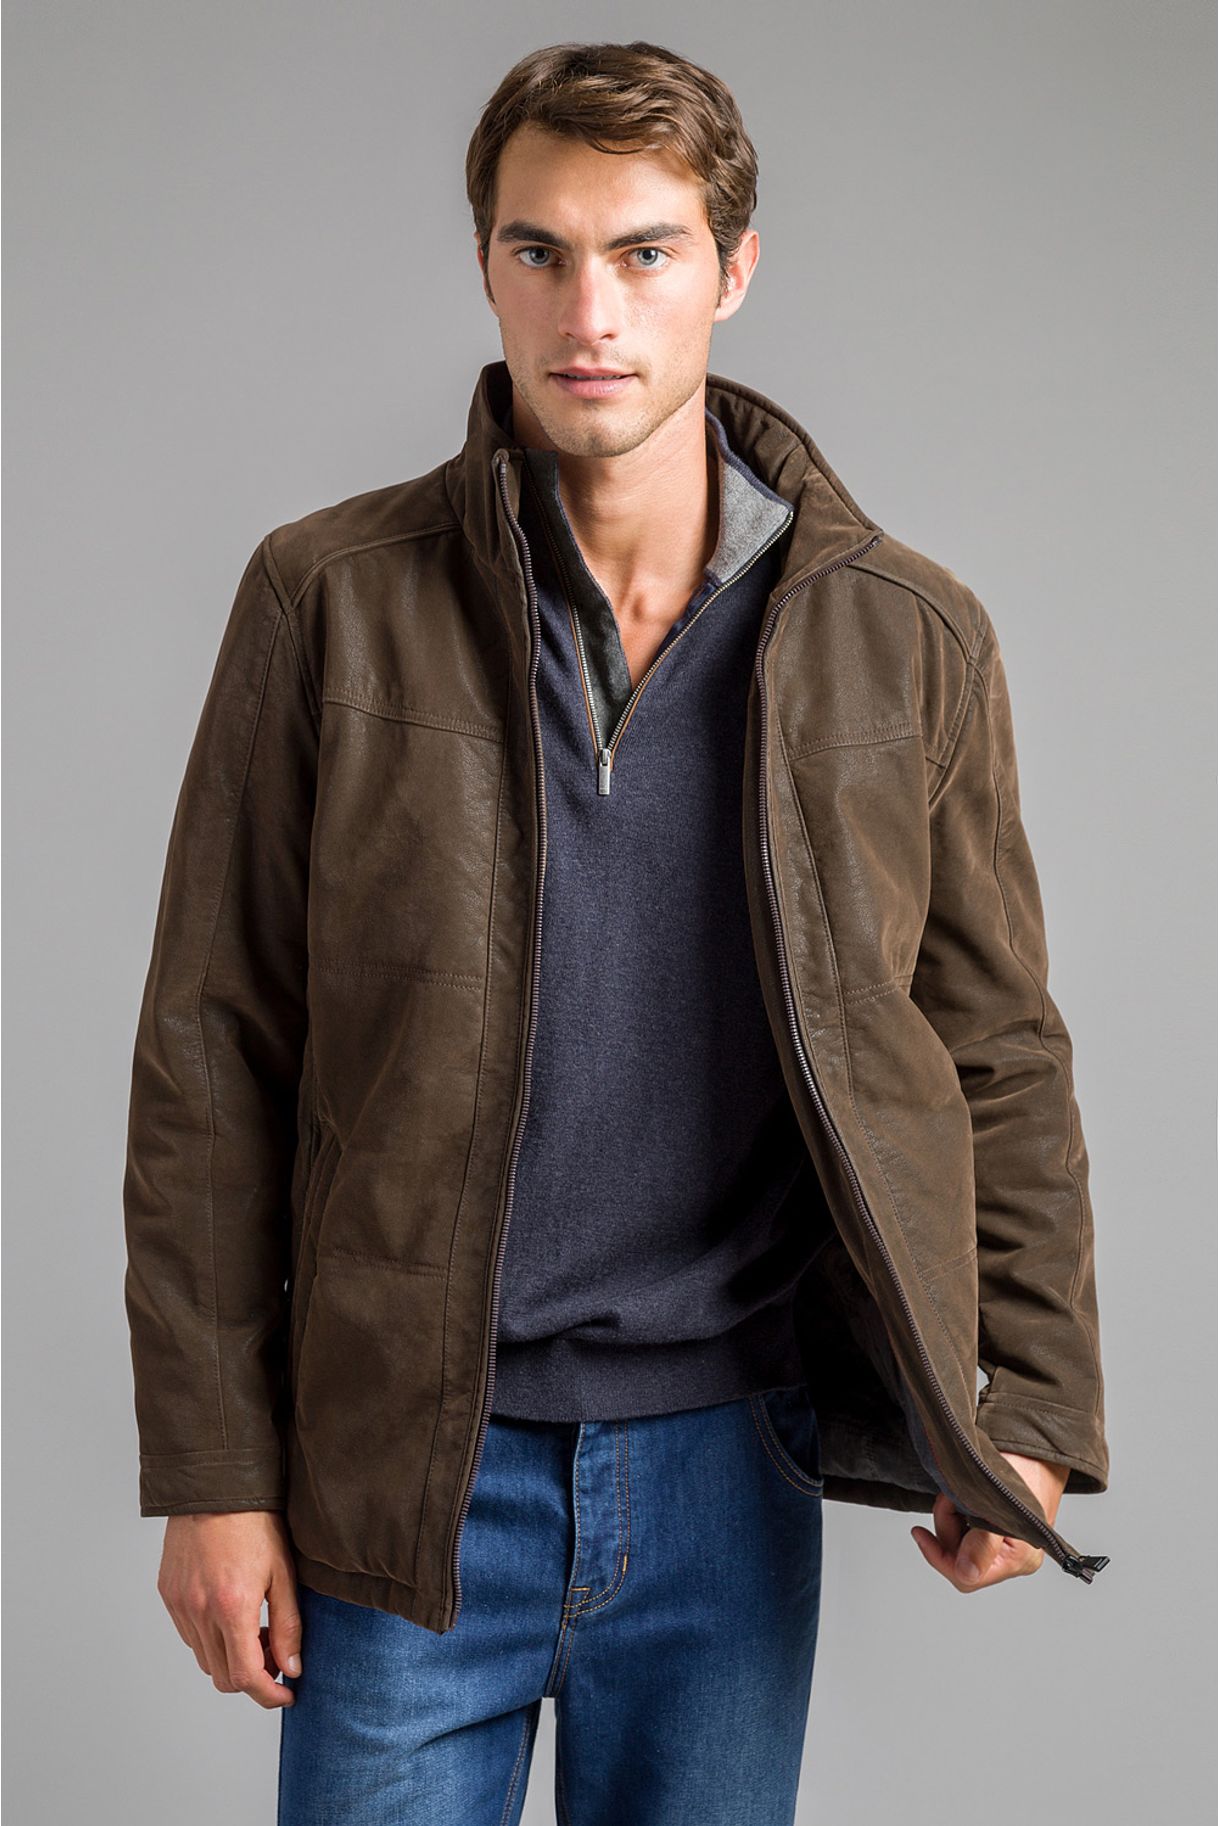 BROWN JACKET IN SYNTHETIC LEATHER